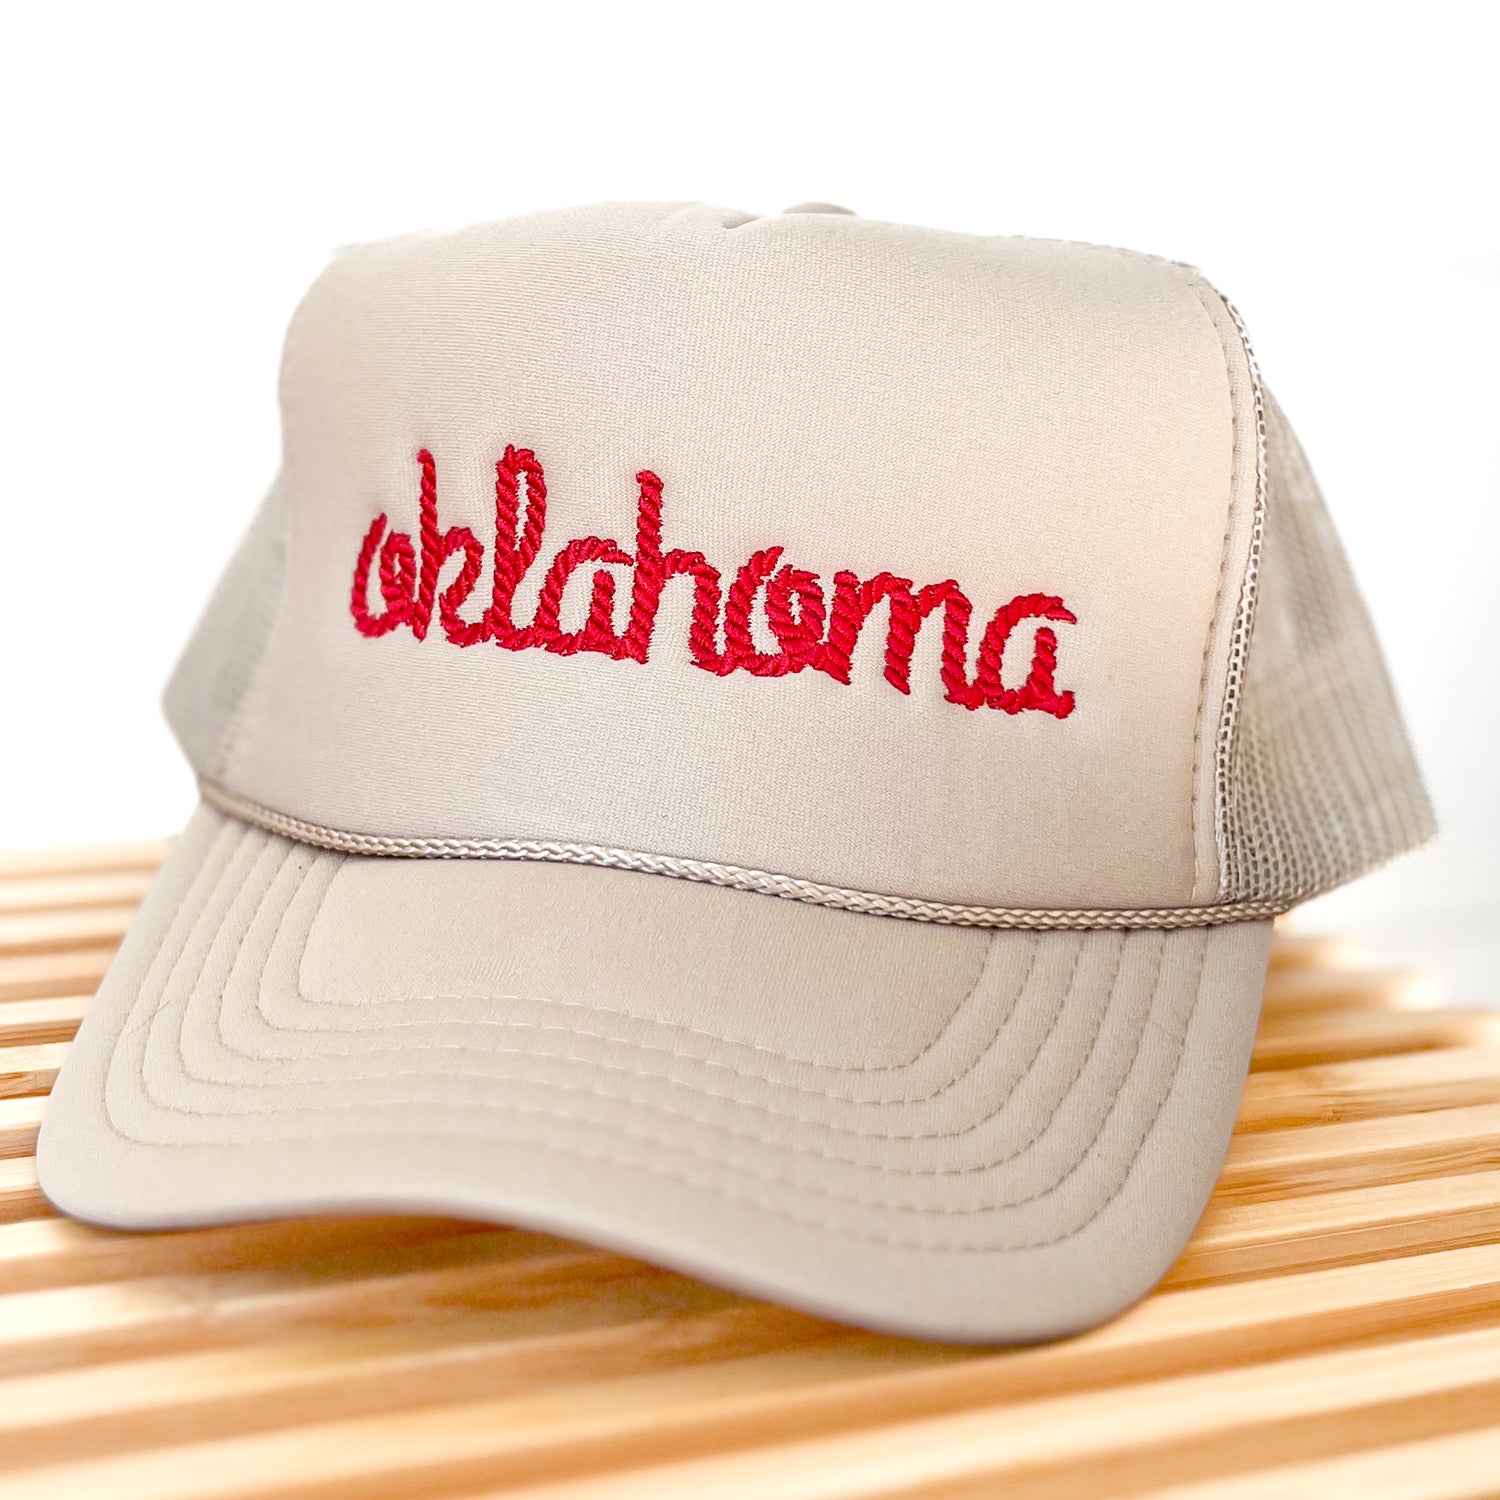 Oklahoma Embroidered Trucker Hat